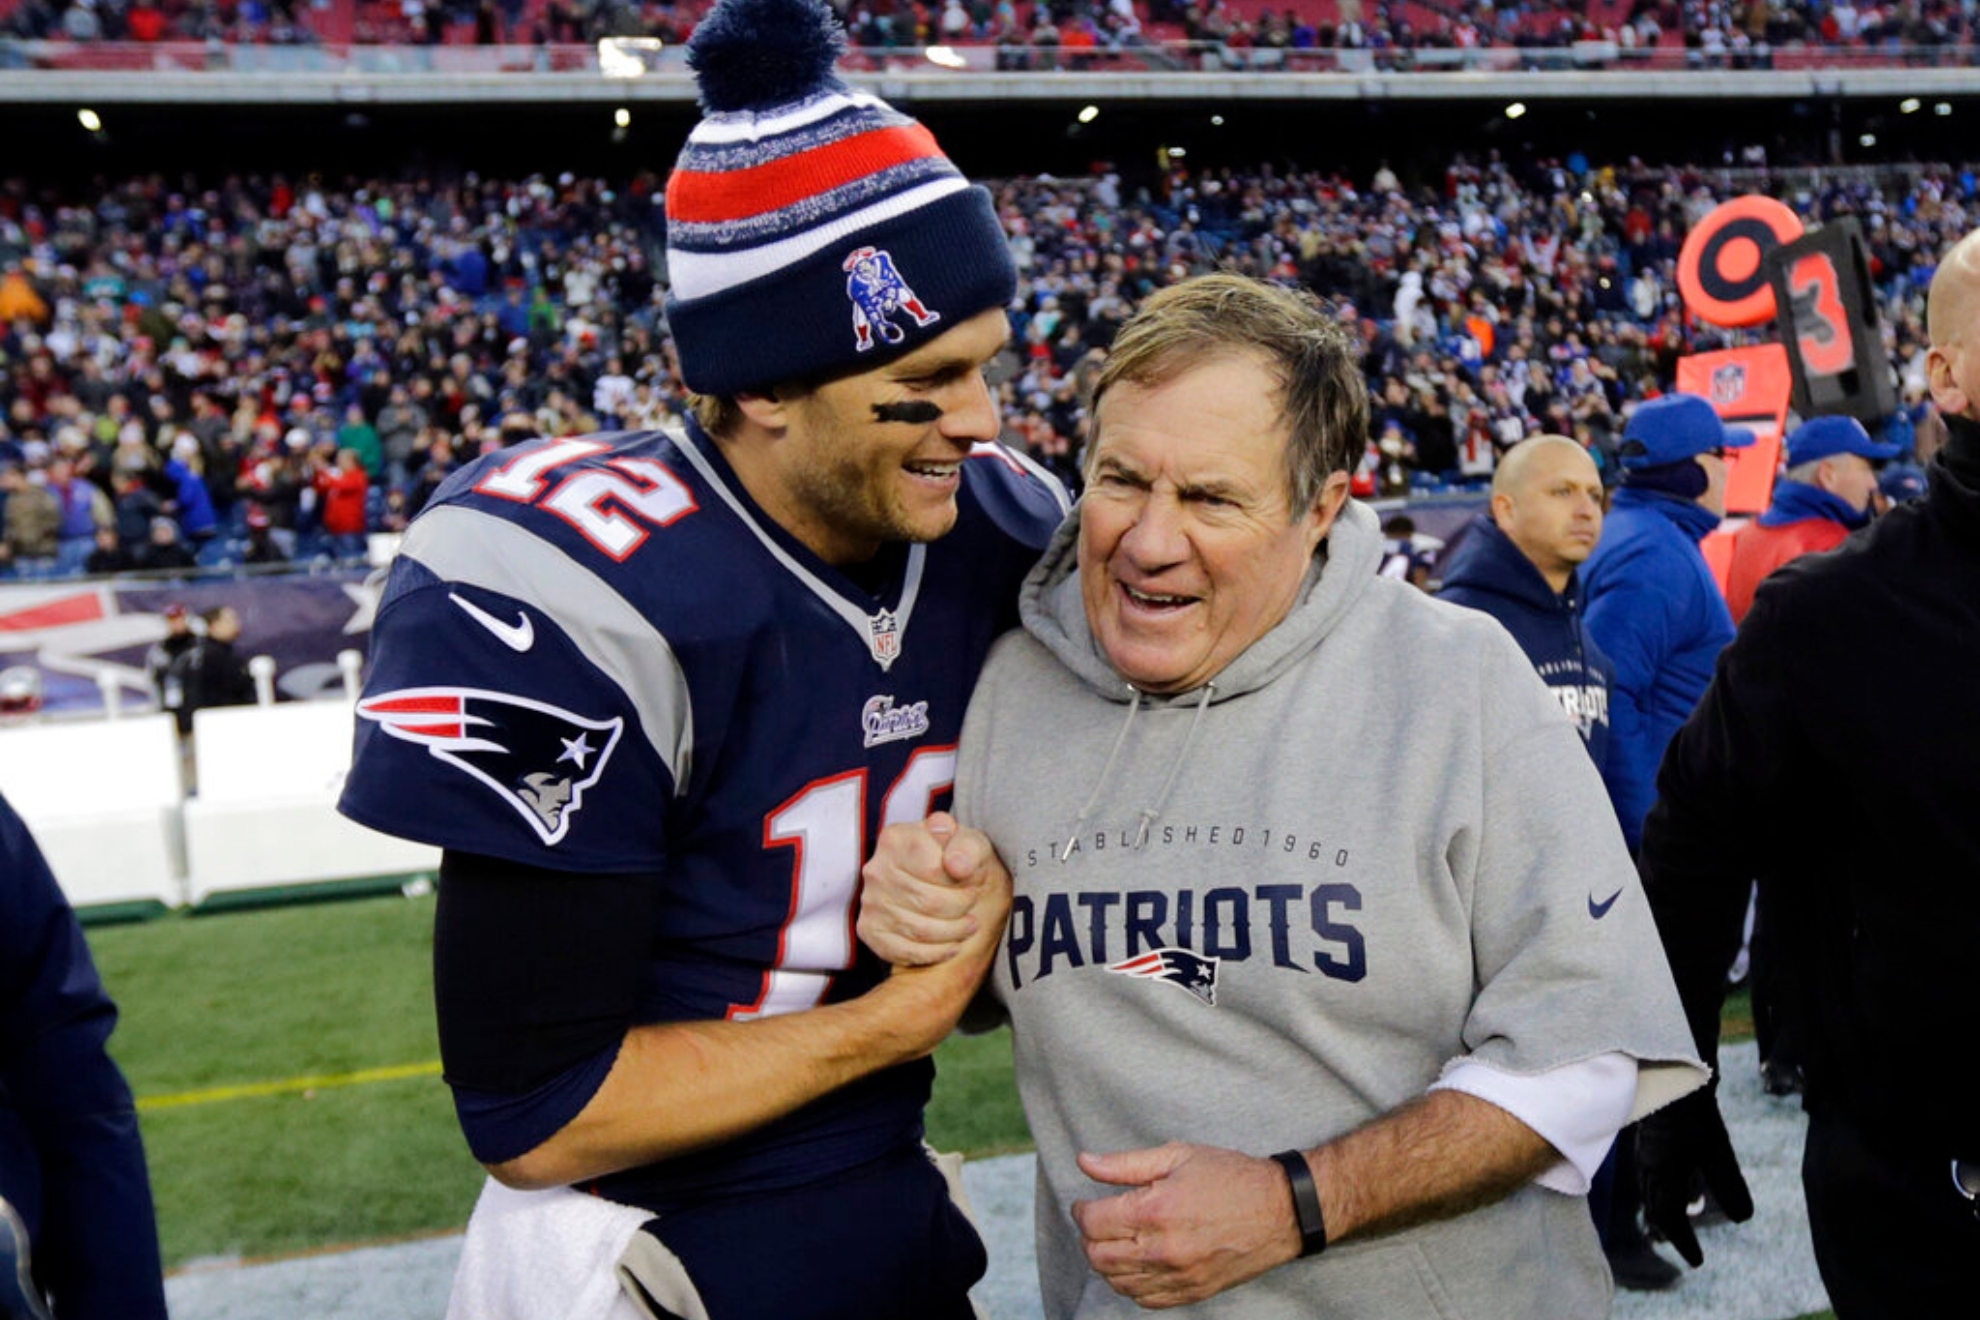 If it were up to NFL fans, Brady and Belichik would be up for a reunion